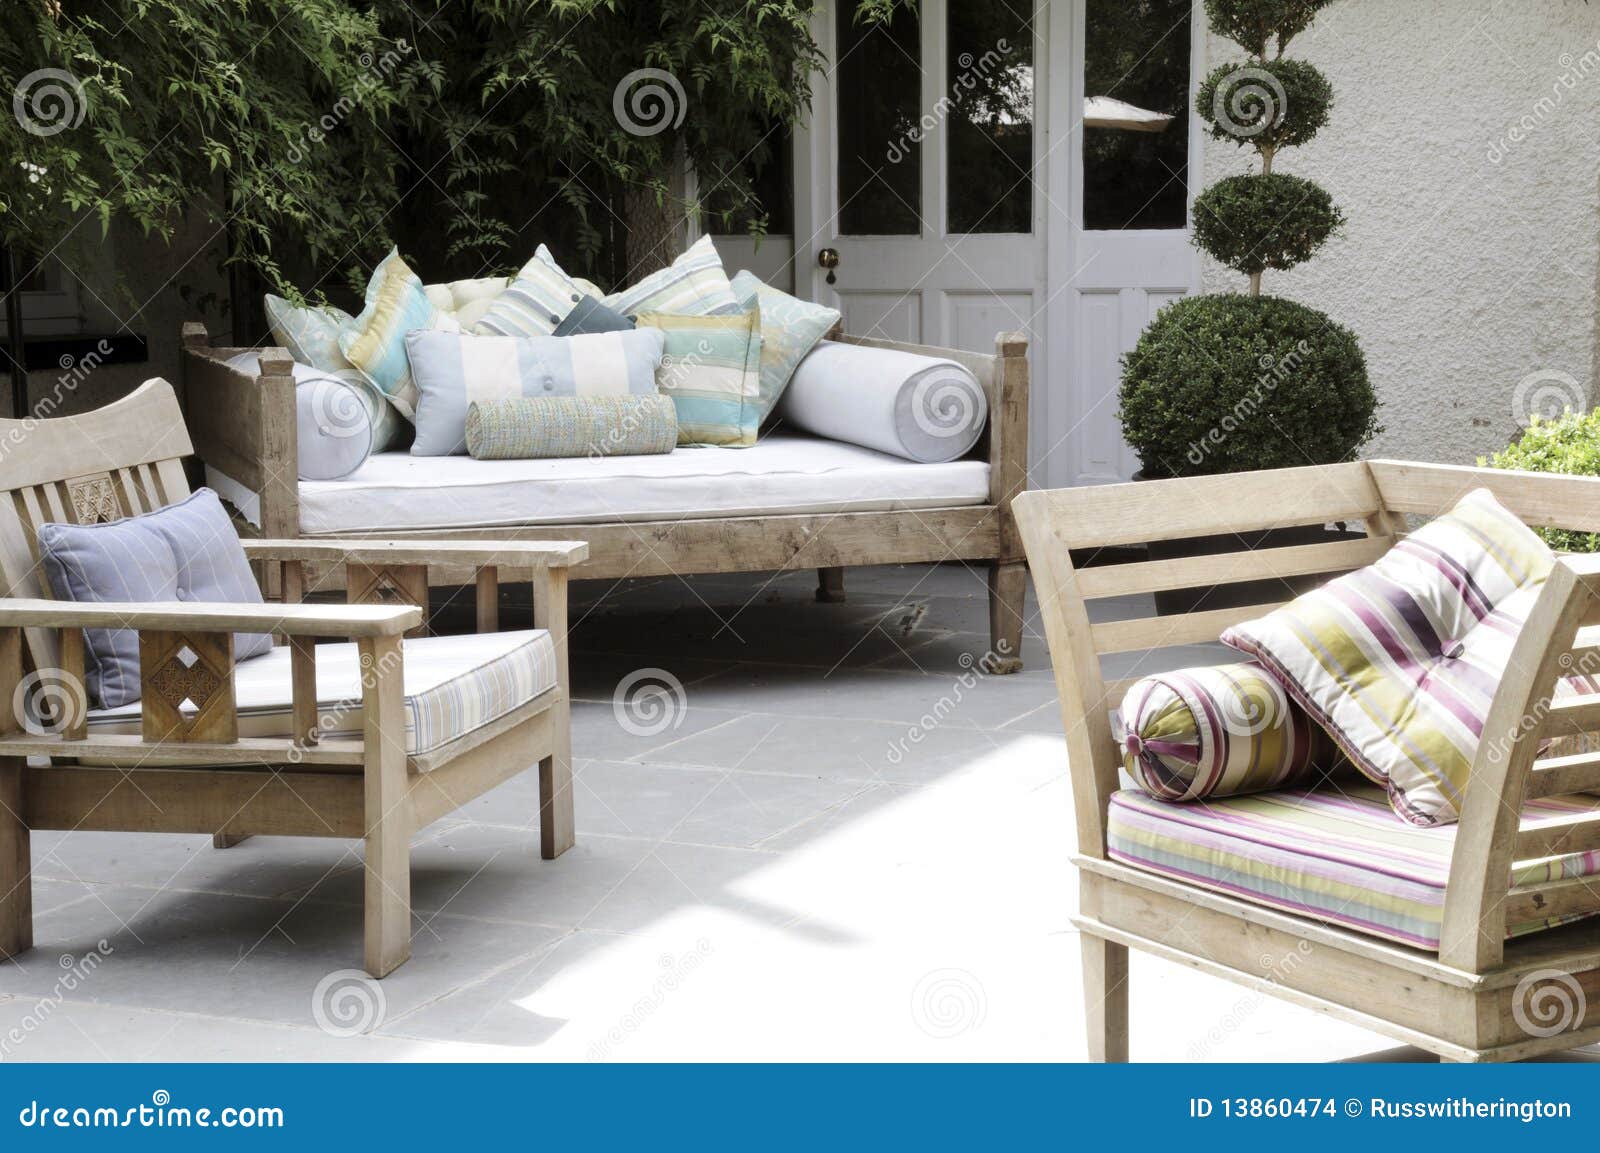 outside seating